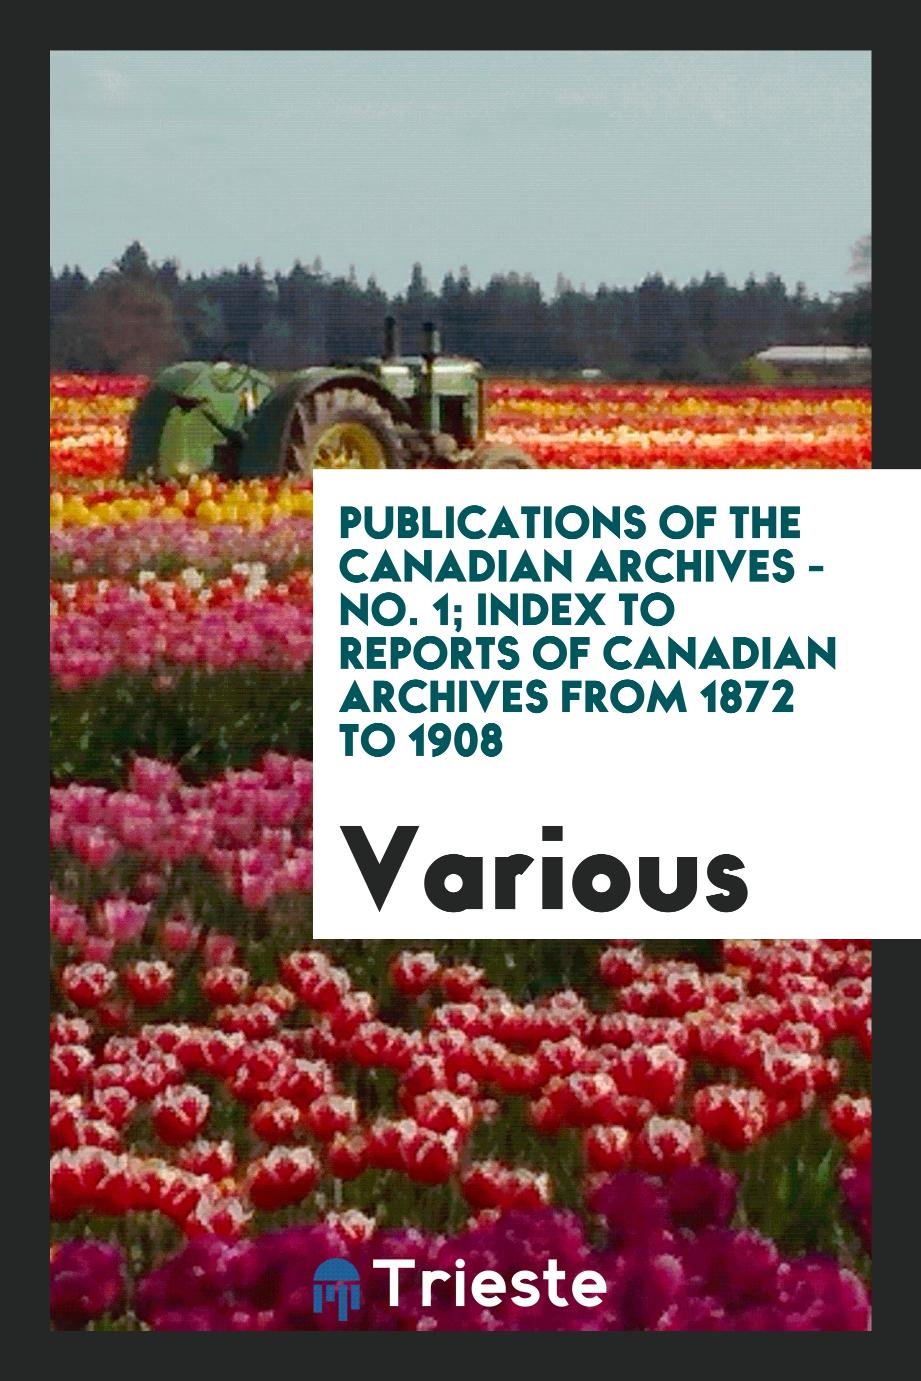 Publications of the Canadian Archives - No. 1; Index to reports of Canadian Archives from 1872 to 1908